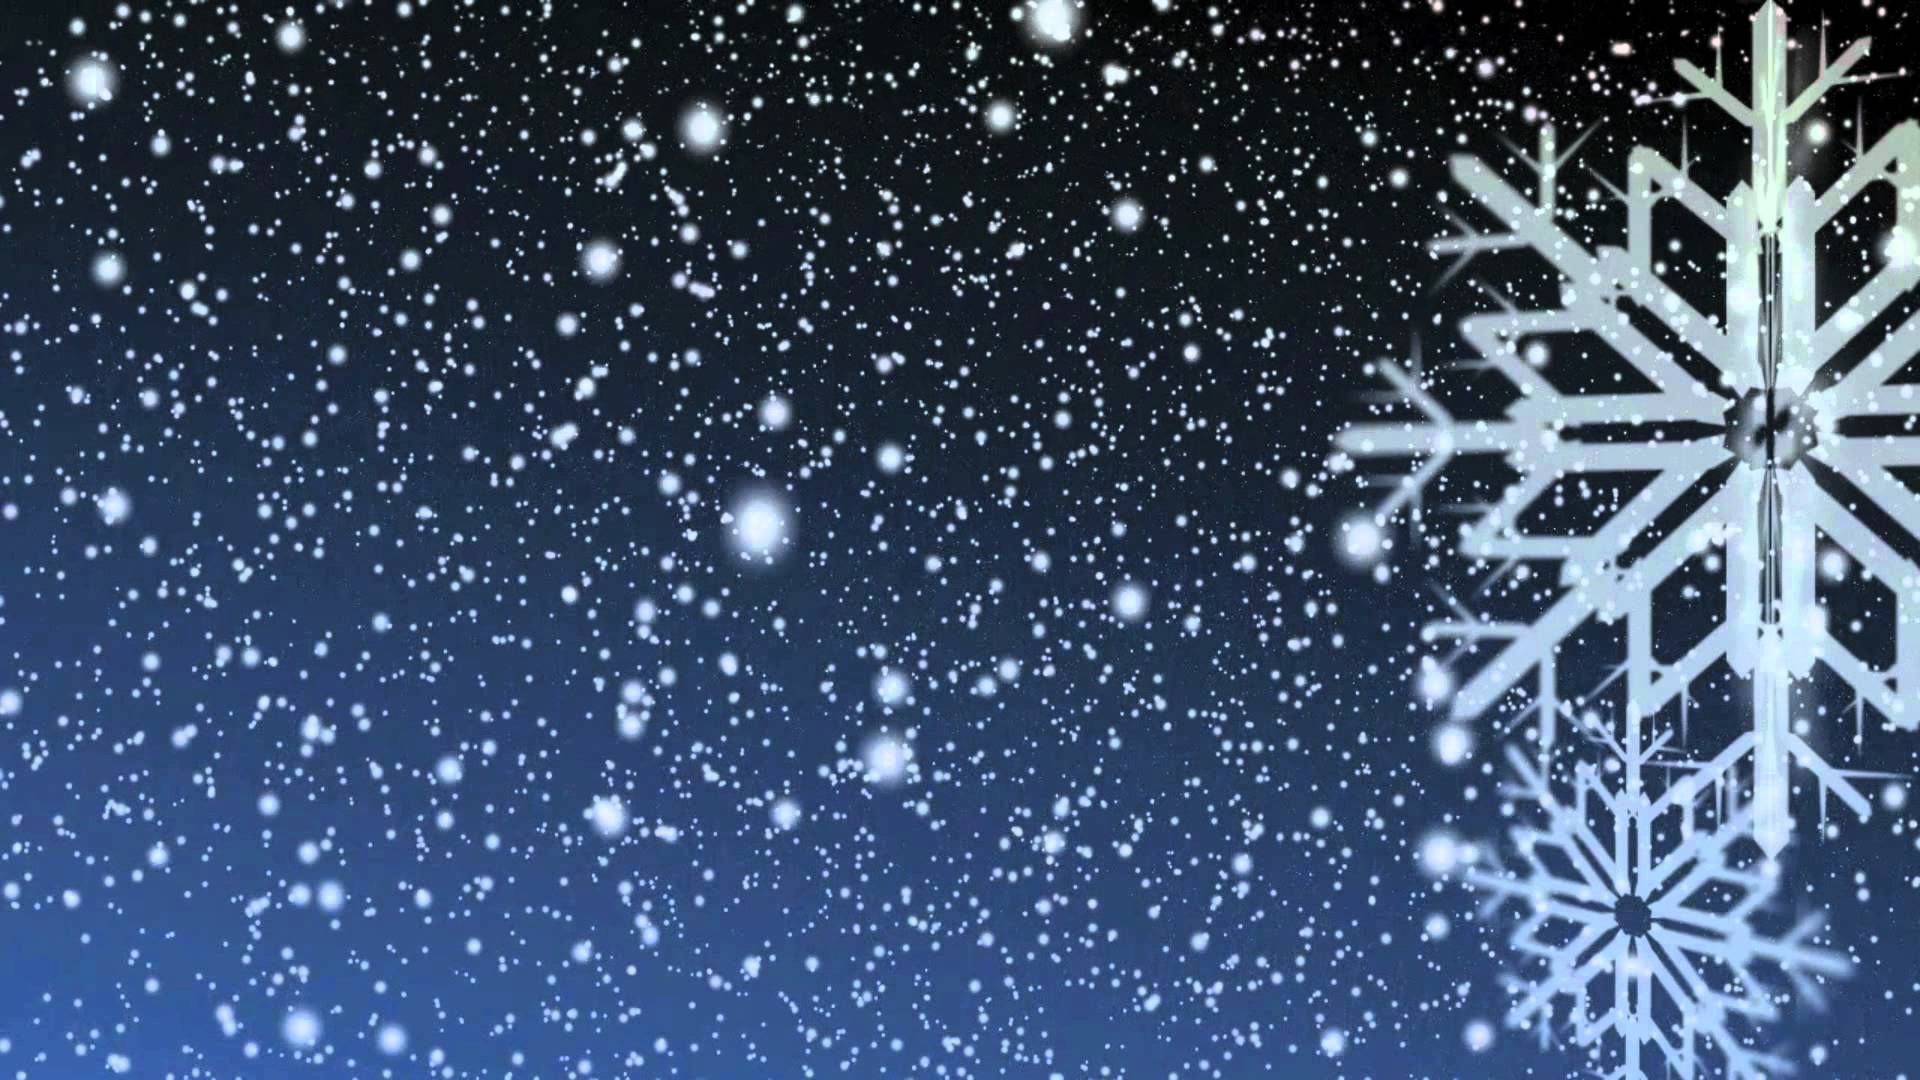 Falling Snow Wallpapers - Wallpaper Cave